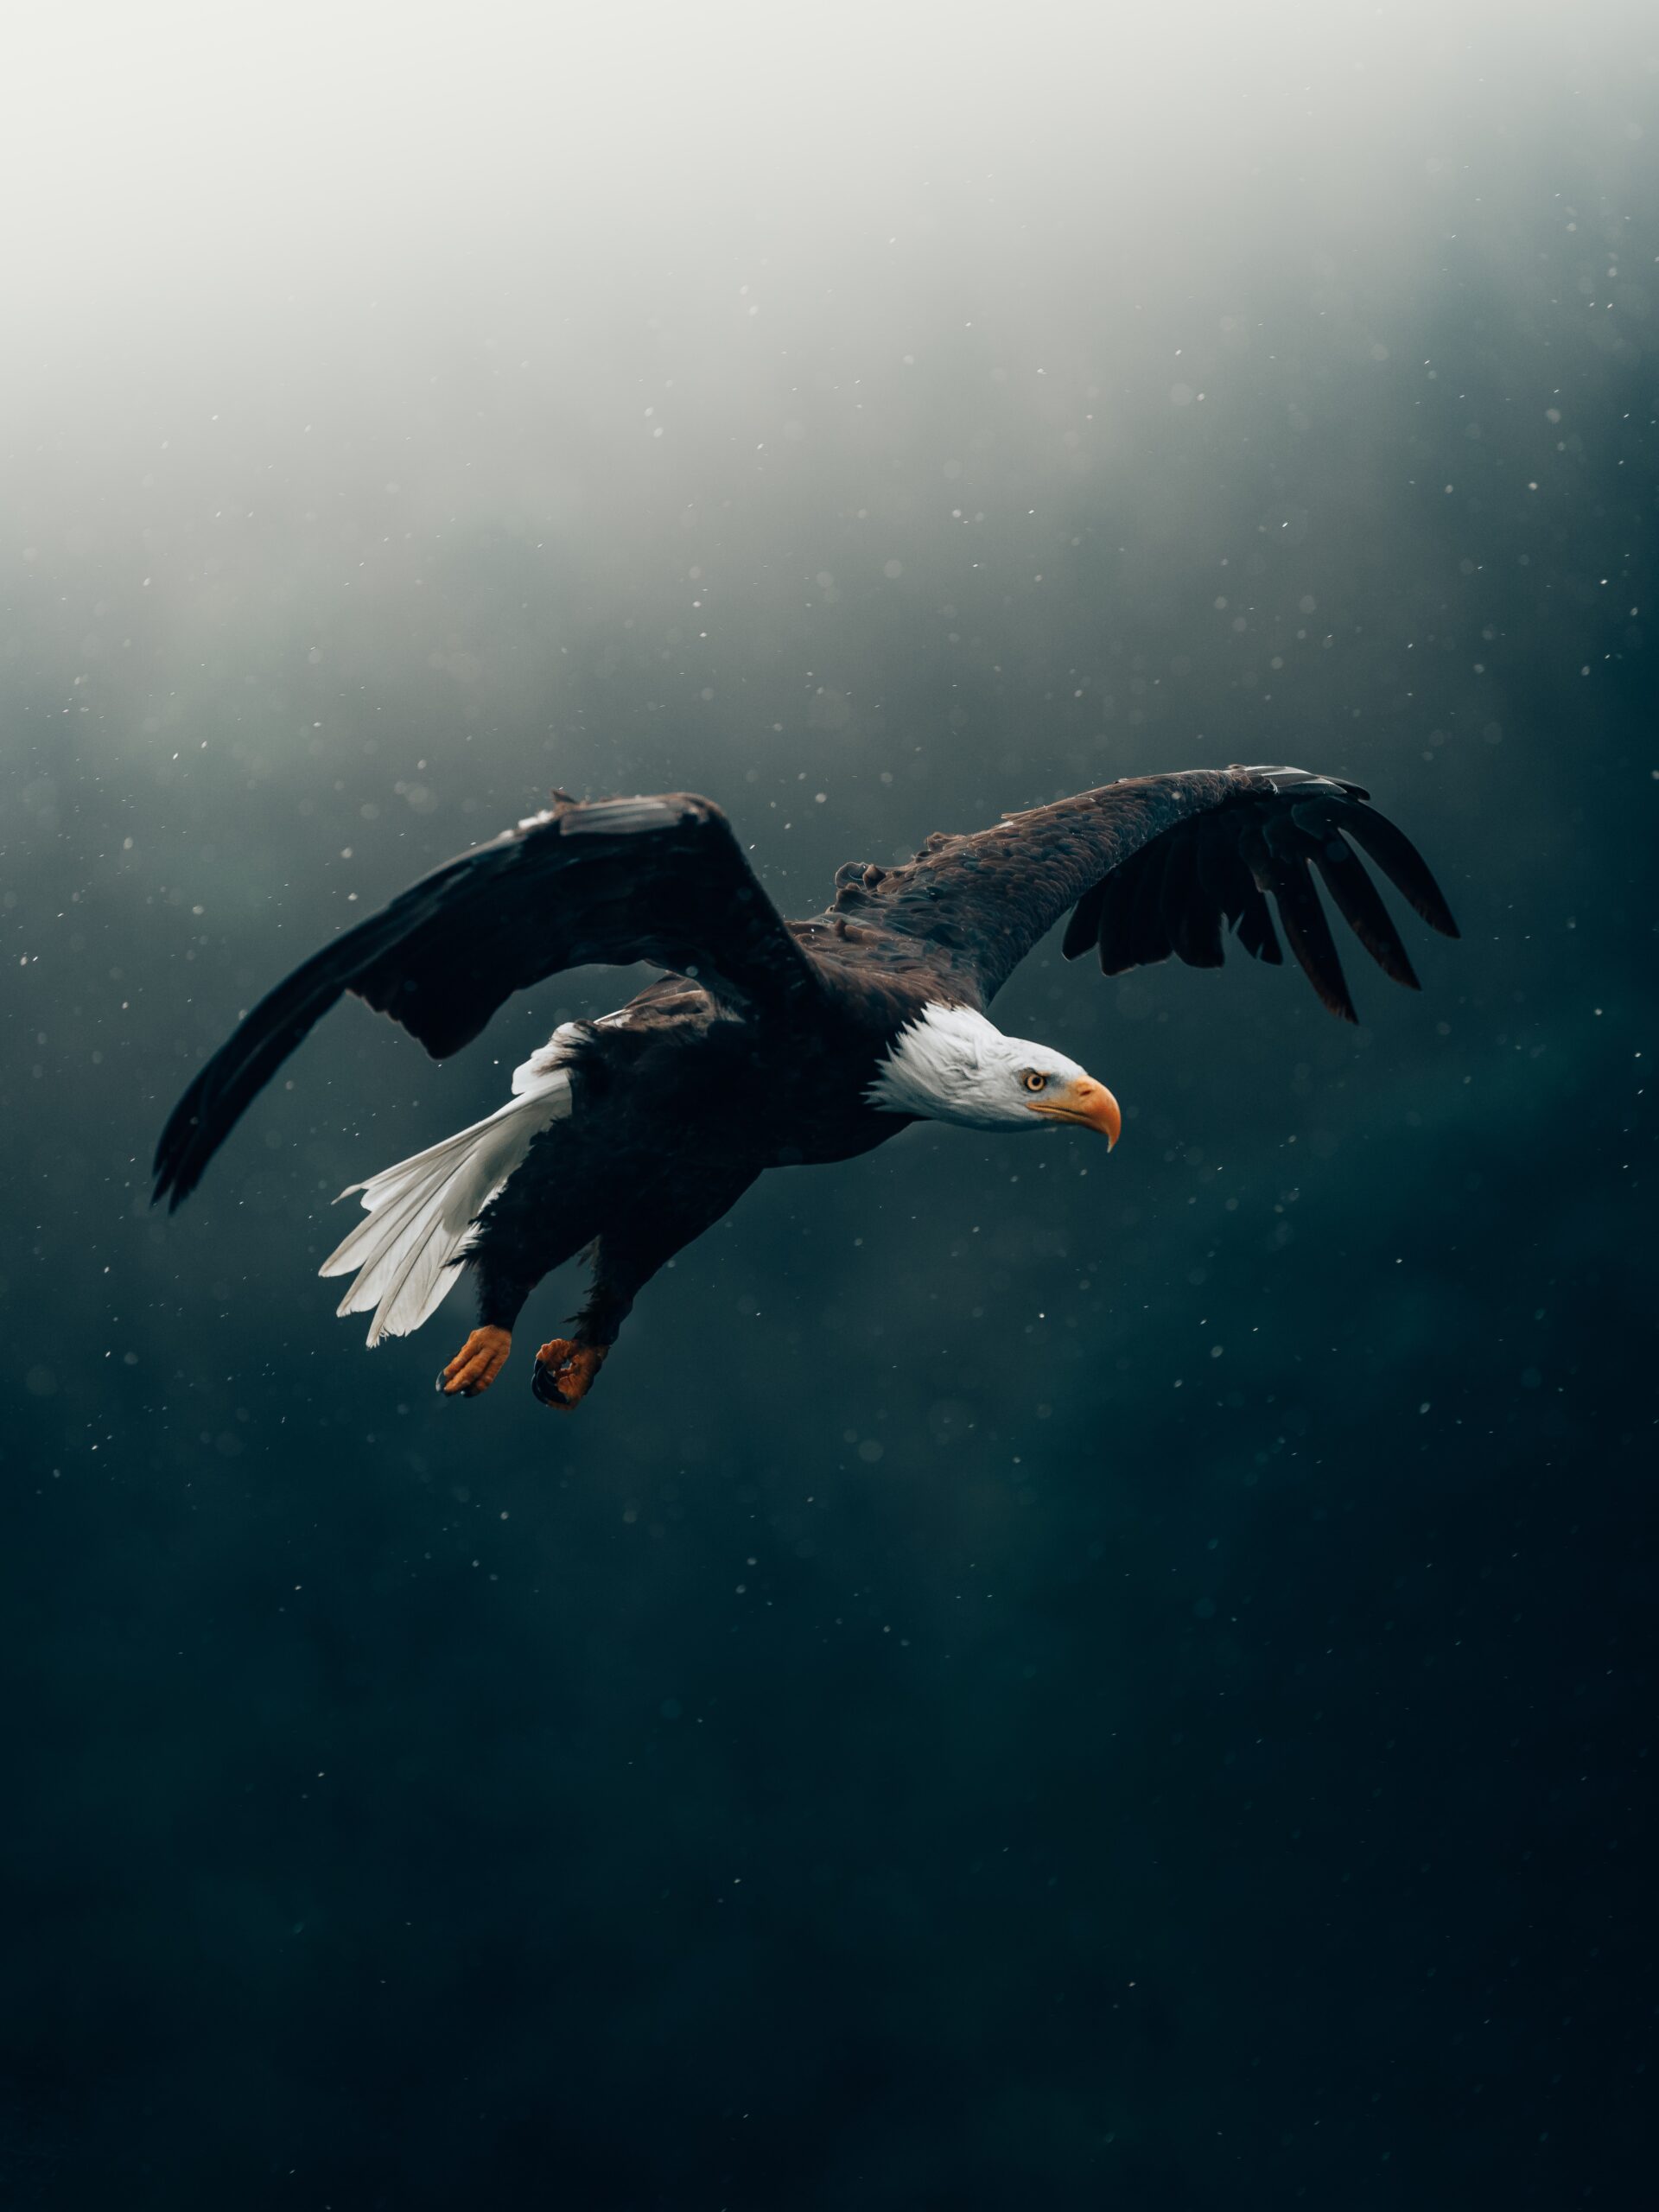 “Let’s Fly Like The Eagles!” Upcoming Online Retreats, Welcome.